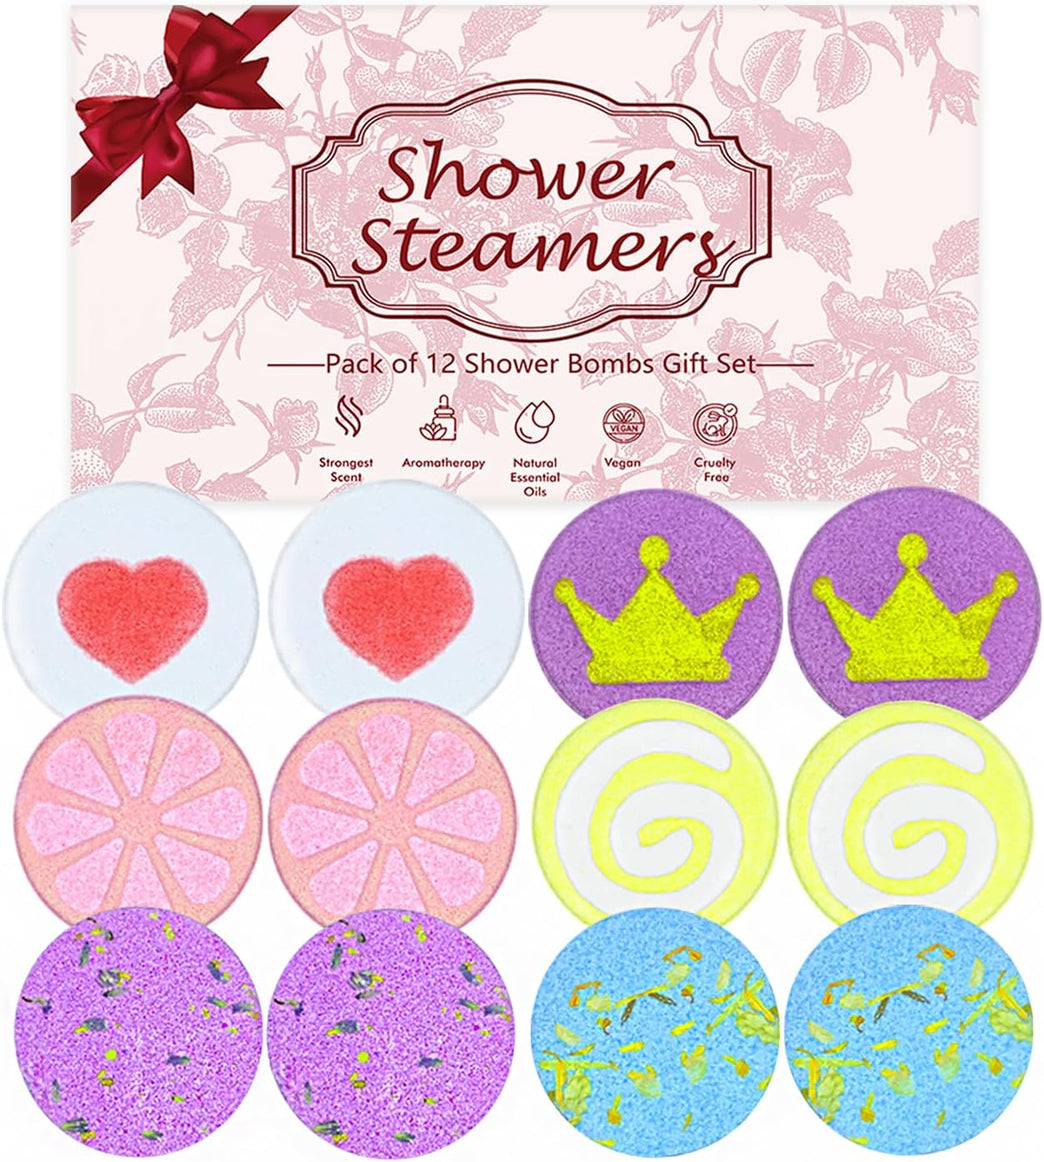 Lanwexy Shower Steamers: Aromatherapy Shower Bombs with Natural Essential Oils